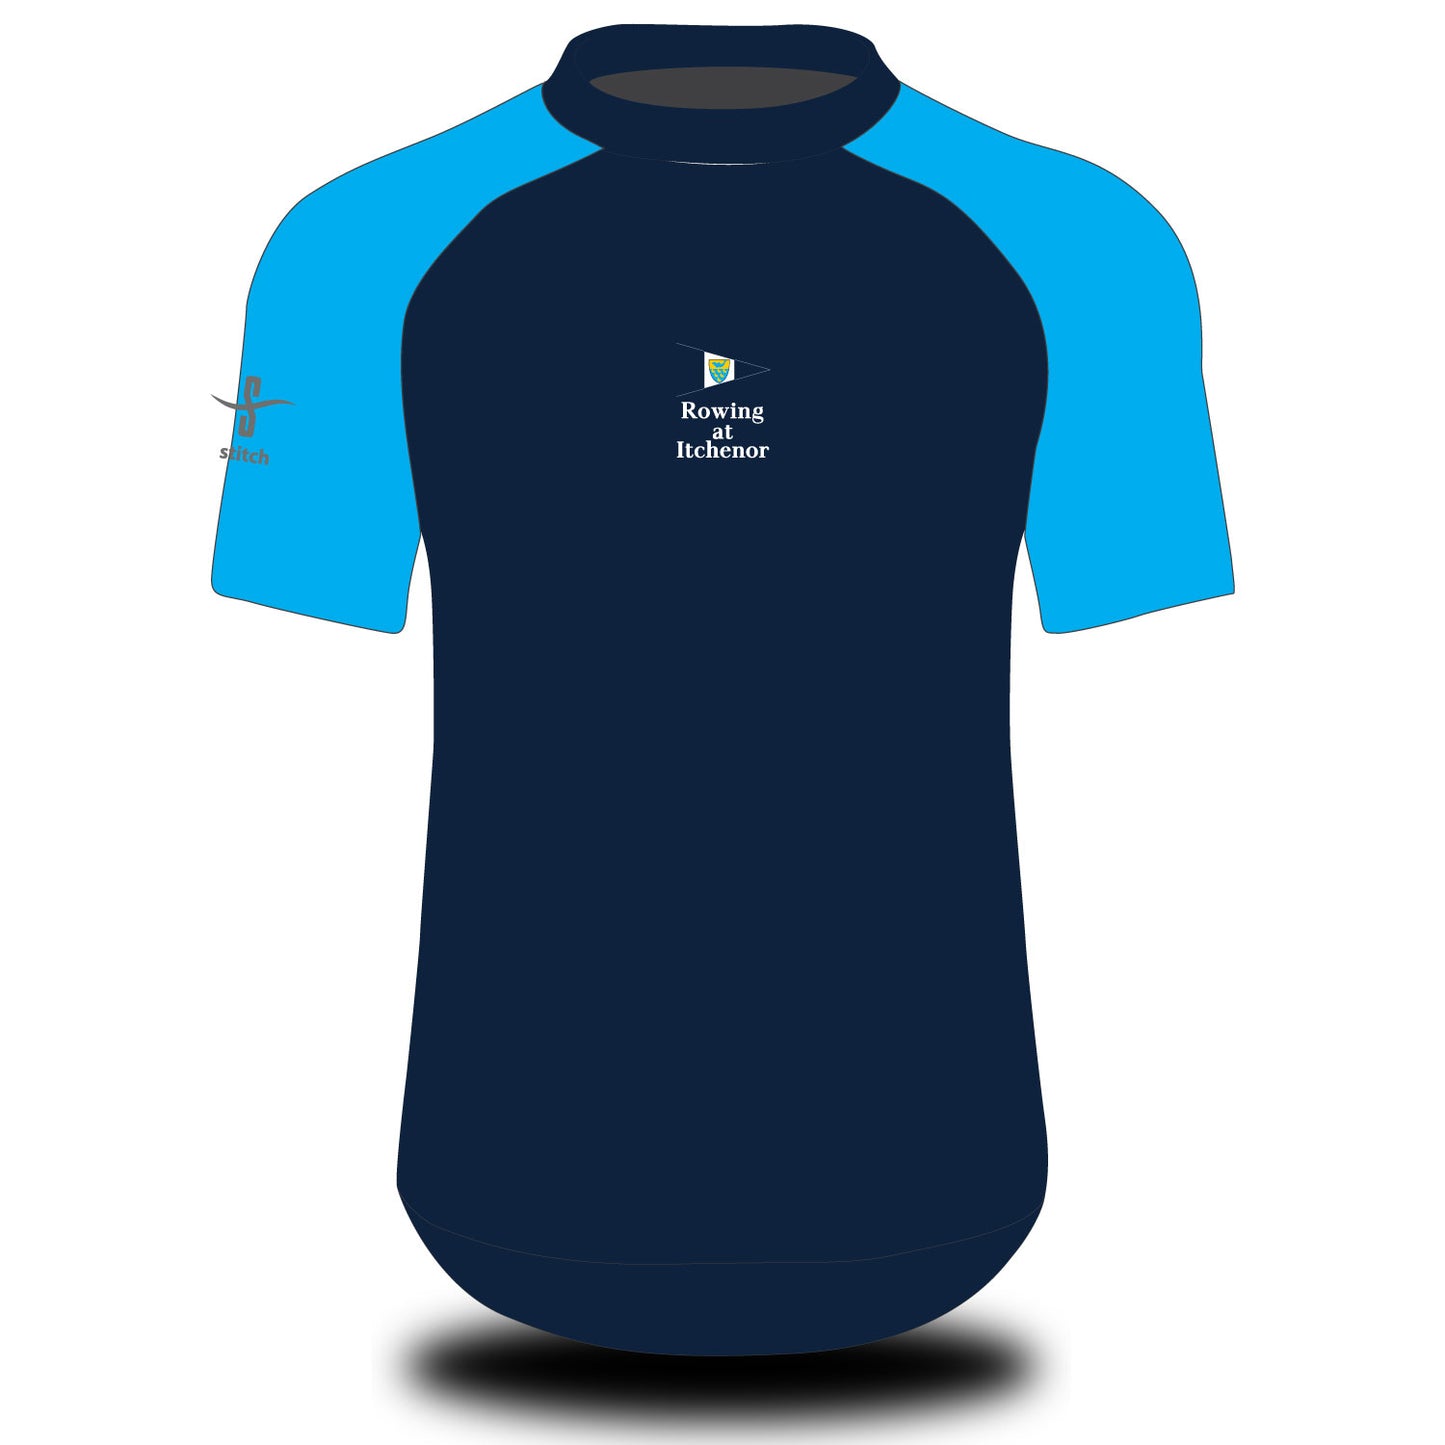 Rowing at Itchenor Tech Top Short Sleeve